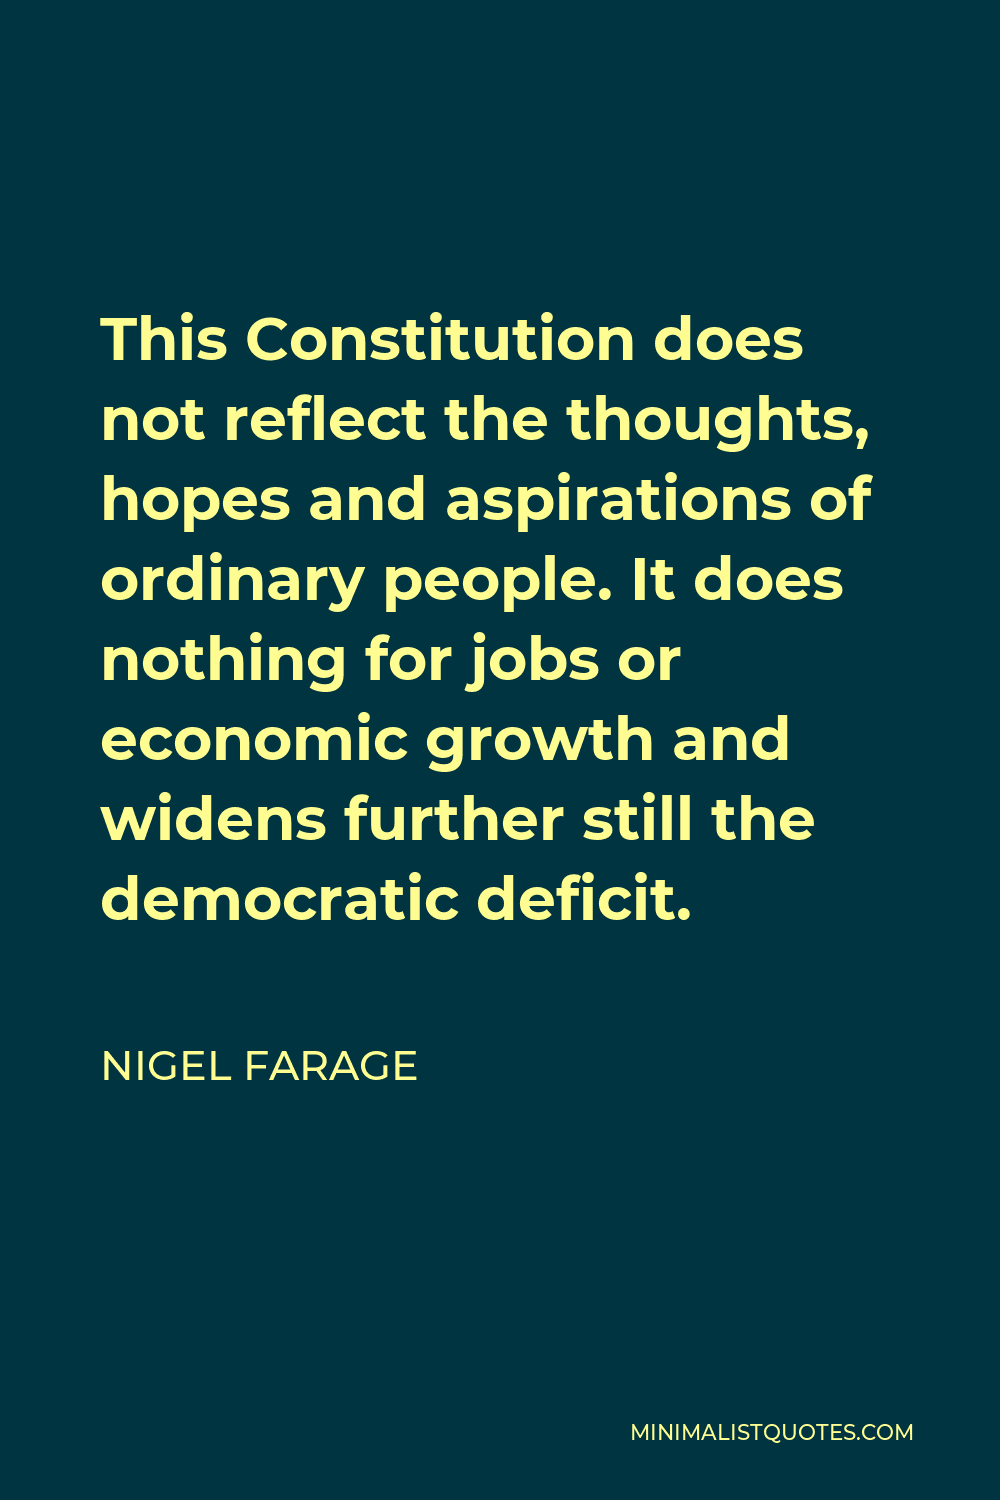 Nigel Farage Quote - This Constitution does not reflect the thoughts, hopes and aspirations of ordinary people. It does nothing for jobs or economic growth and widens further still the democratic deficit.